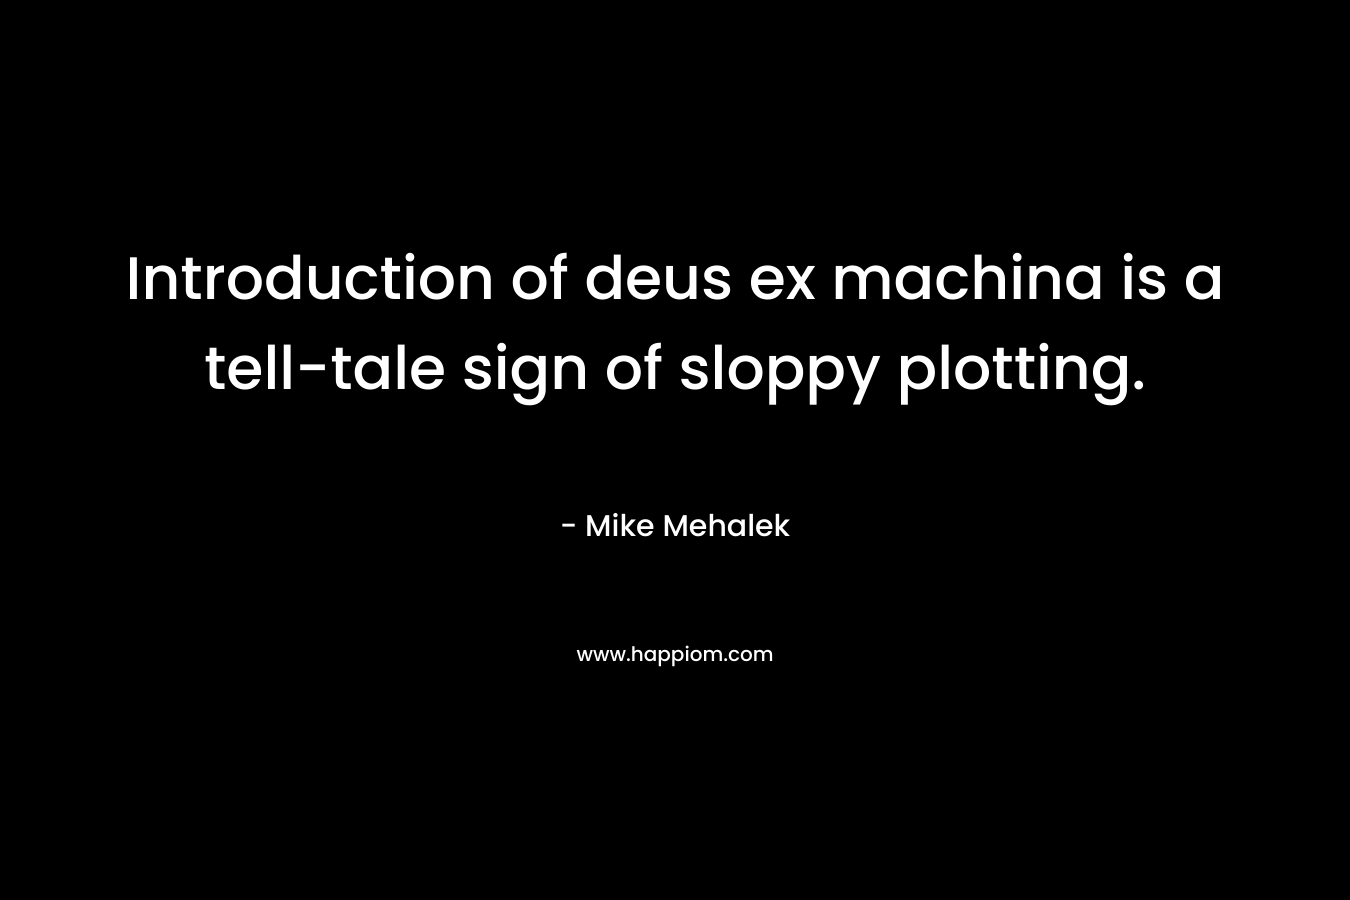 Introduction of deus ex machina is a tell-tale sign of sloppy plotting. – Mike Mehalek